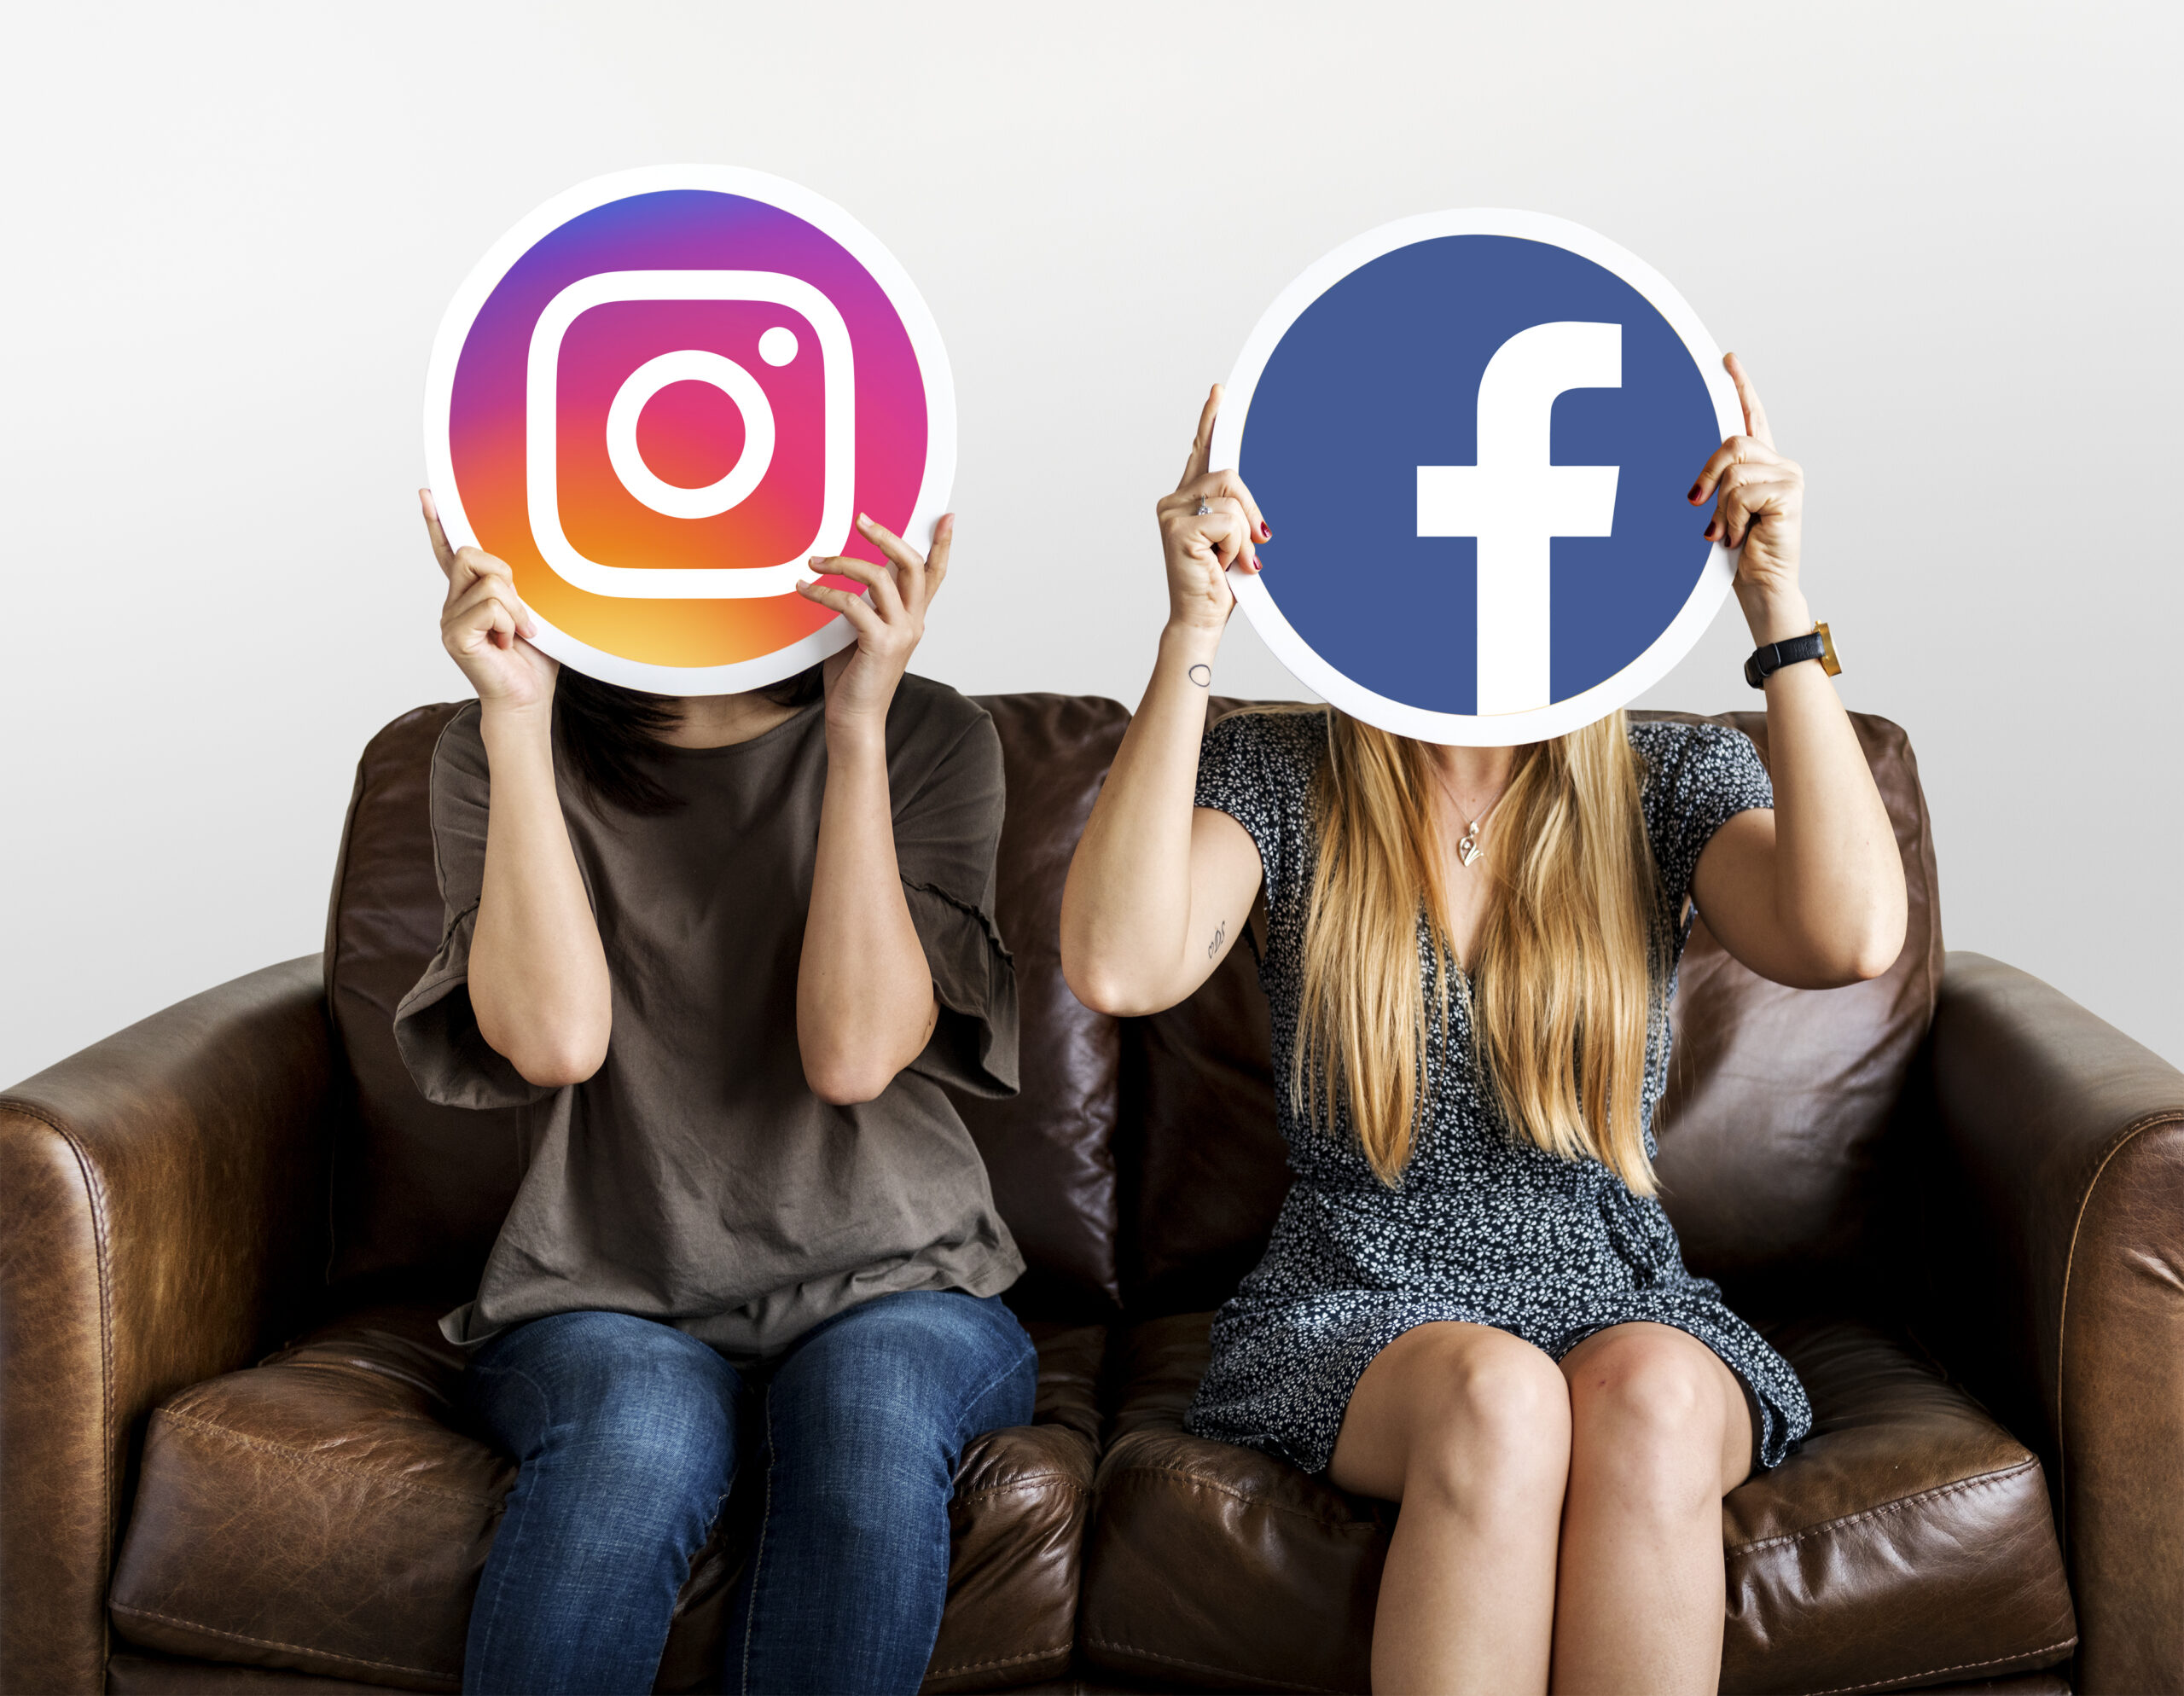 Two women are seated on a couch. One is holding the Instagram logo in front of her face, the other is holding the facebook logo in front of hers.